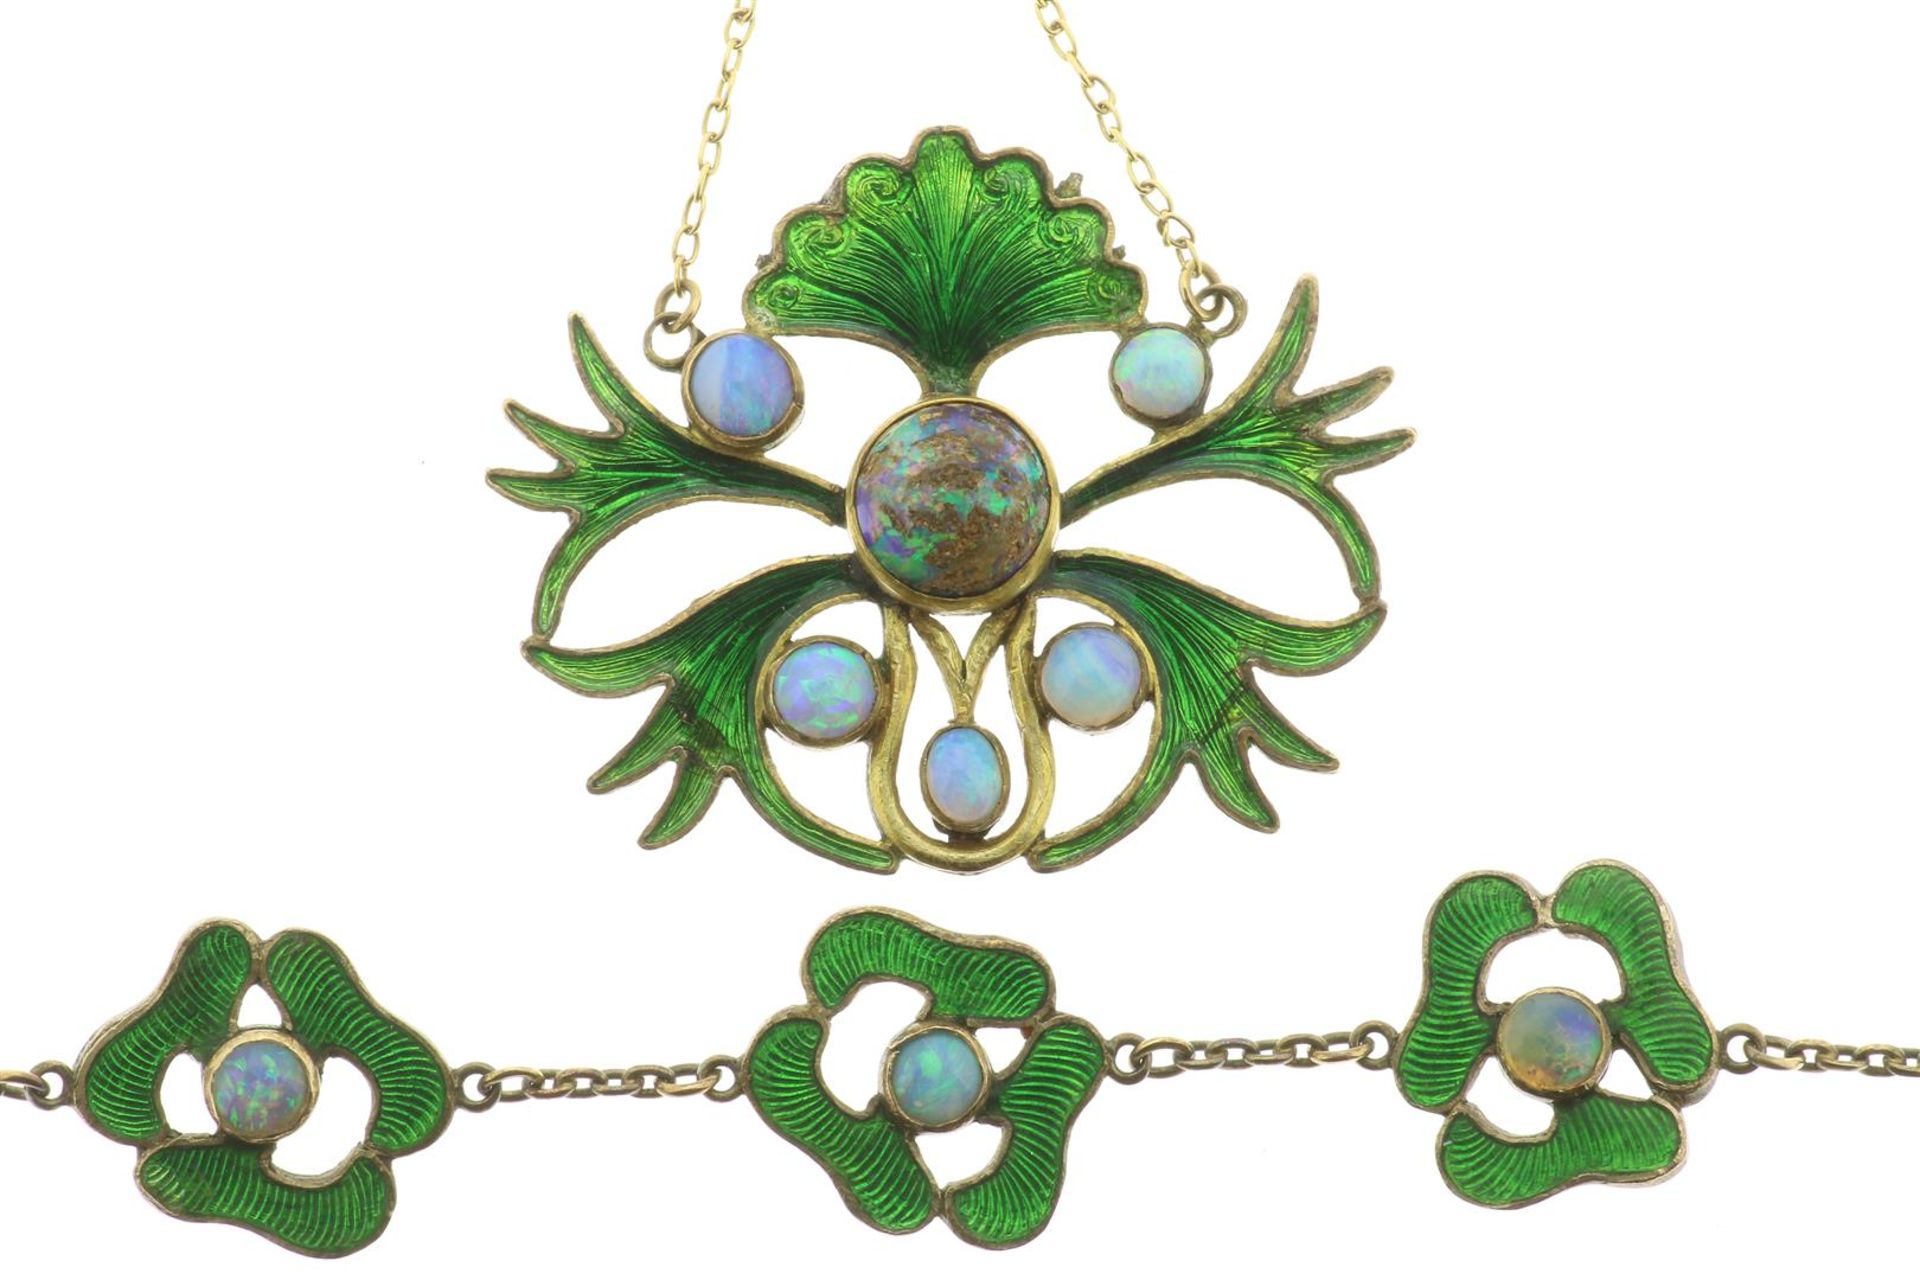 Demiparure with Art Nouveau boat necklace with leaves inlaid with green enamel and opals, and 2-